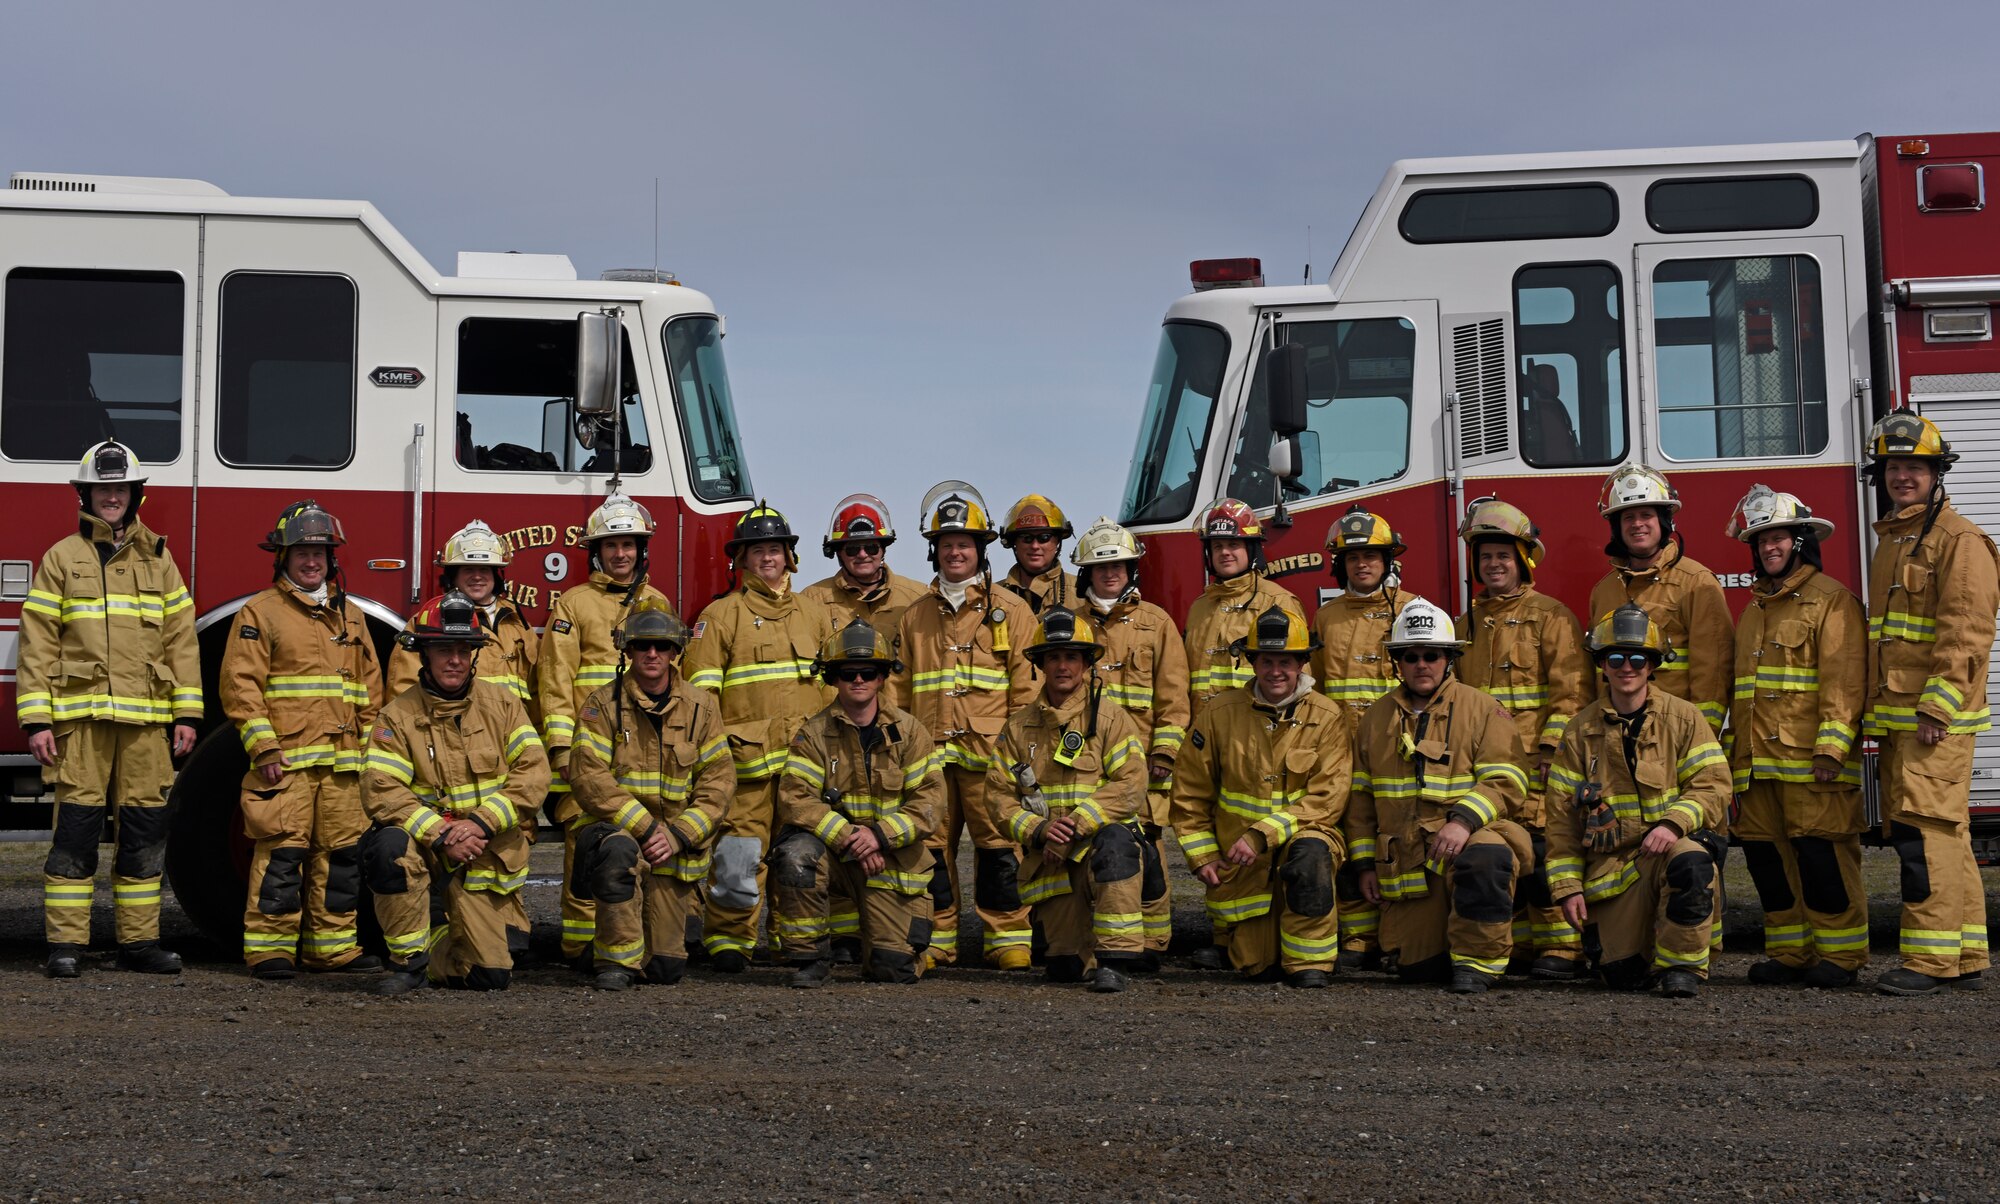 Oregon Air National Guard Airmen from Kingsley Field and civil engineer officers from multiple locations across the U.S. pose for a photo after a structural live fire exercise at Fairchild Air Force Base, Washington, April 18, 2018. Kingsley Field firefighters, who lacked adequate training facilities, and civil engineer officers, who required fire marshal certification, both seized an opportunity for joint training with Fairchild during a week-long training effort. (U.S. Air Force photo/Airman 1st Class Jesenia Landaverde)